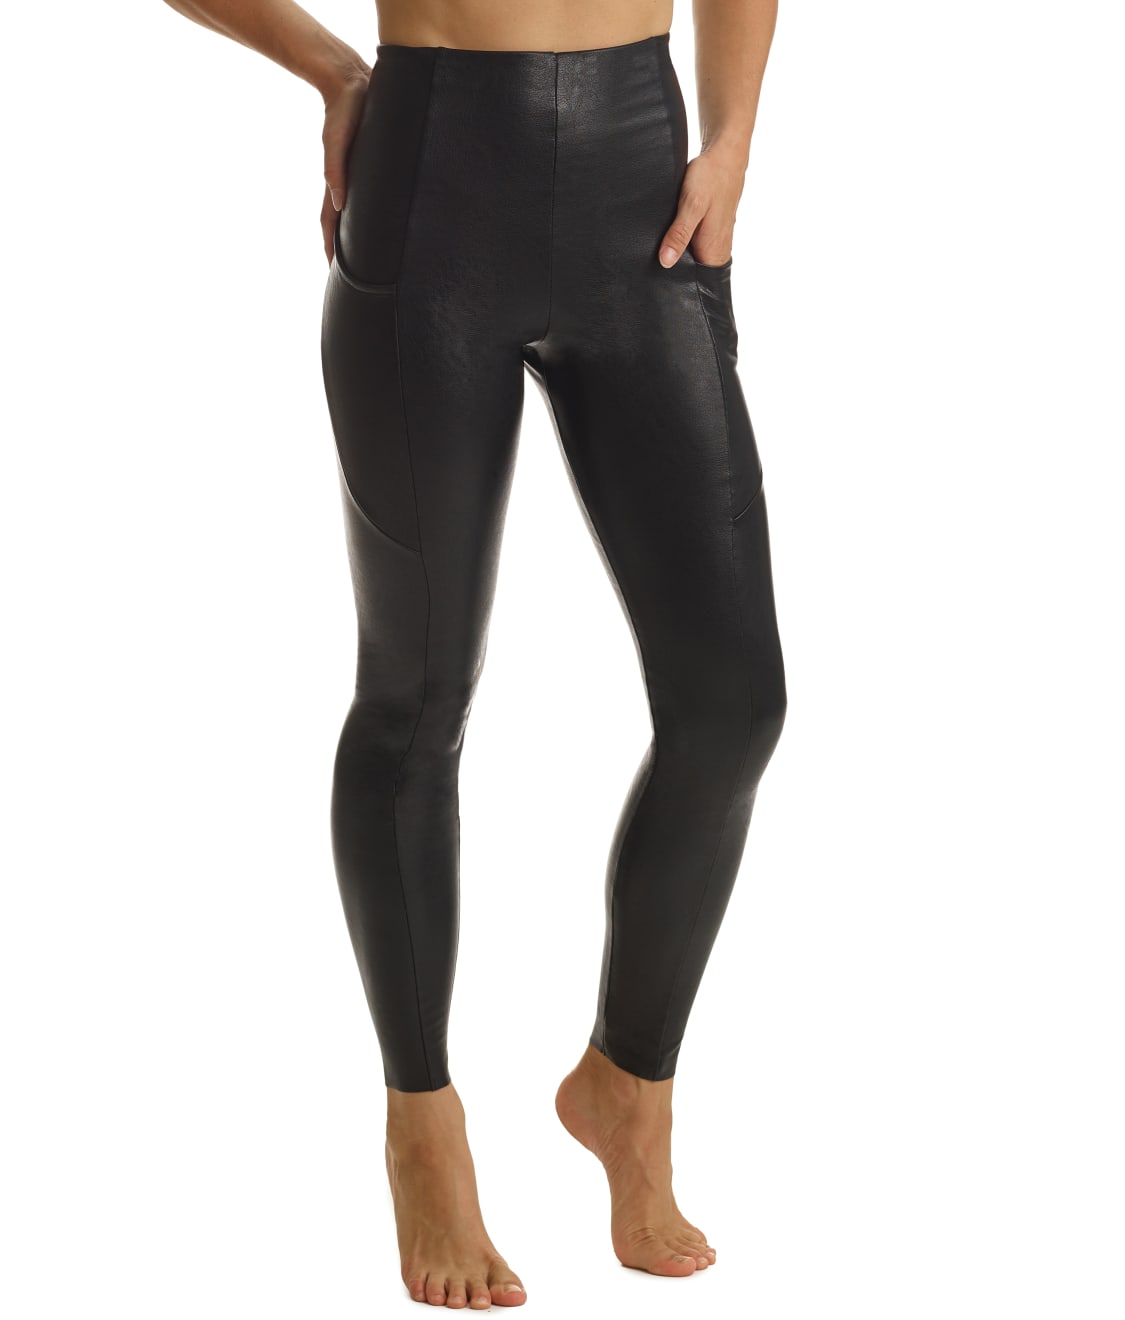 Commando Faux Leather Legging (Black)  Outfits with leggings, Fashion,  Athleisure outfits